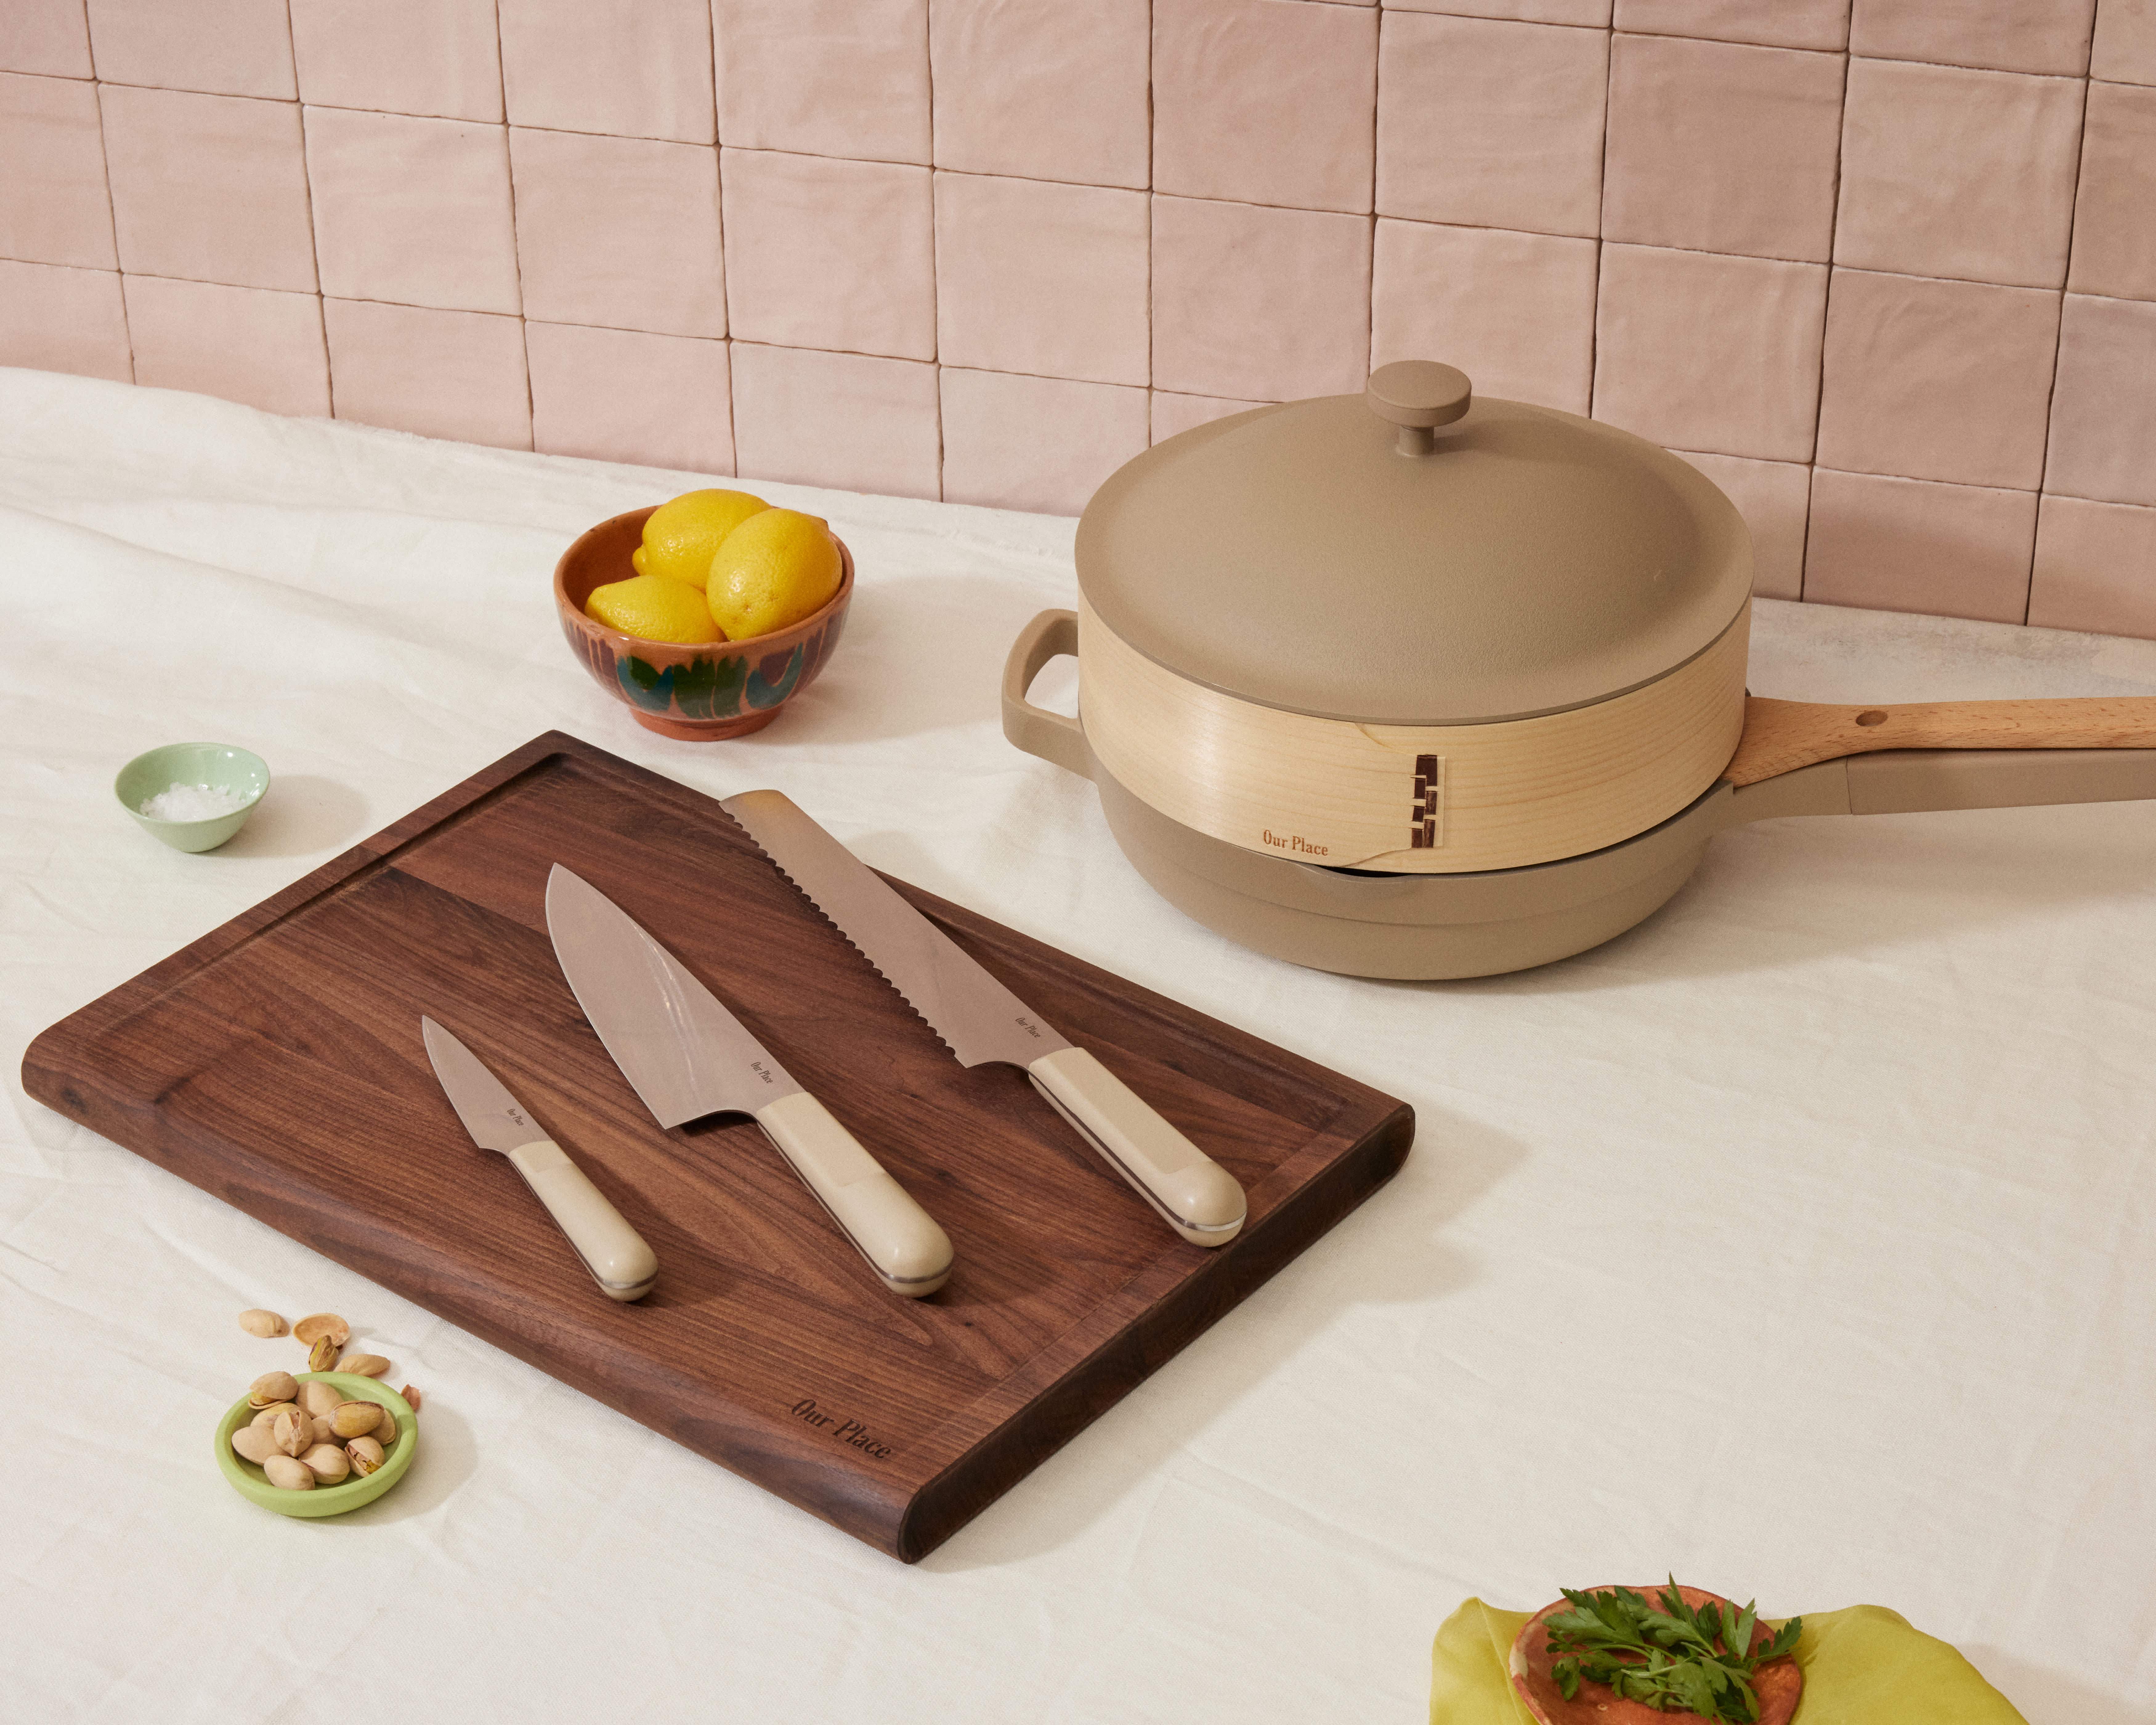 Caraway cookware launches knife sets, utensils, and cutting boards